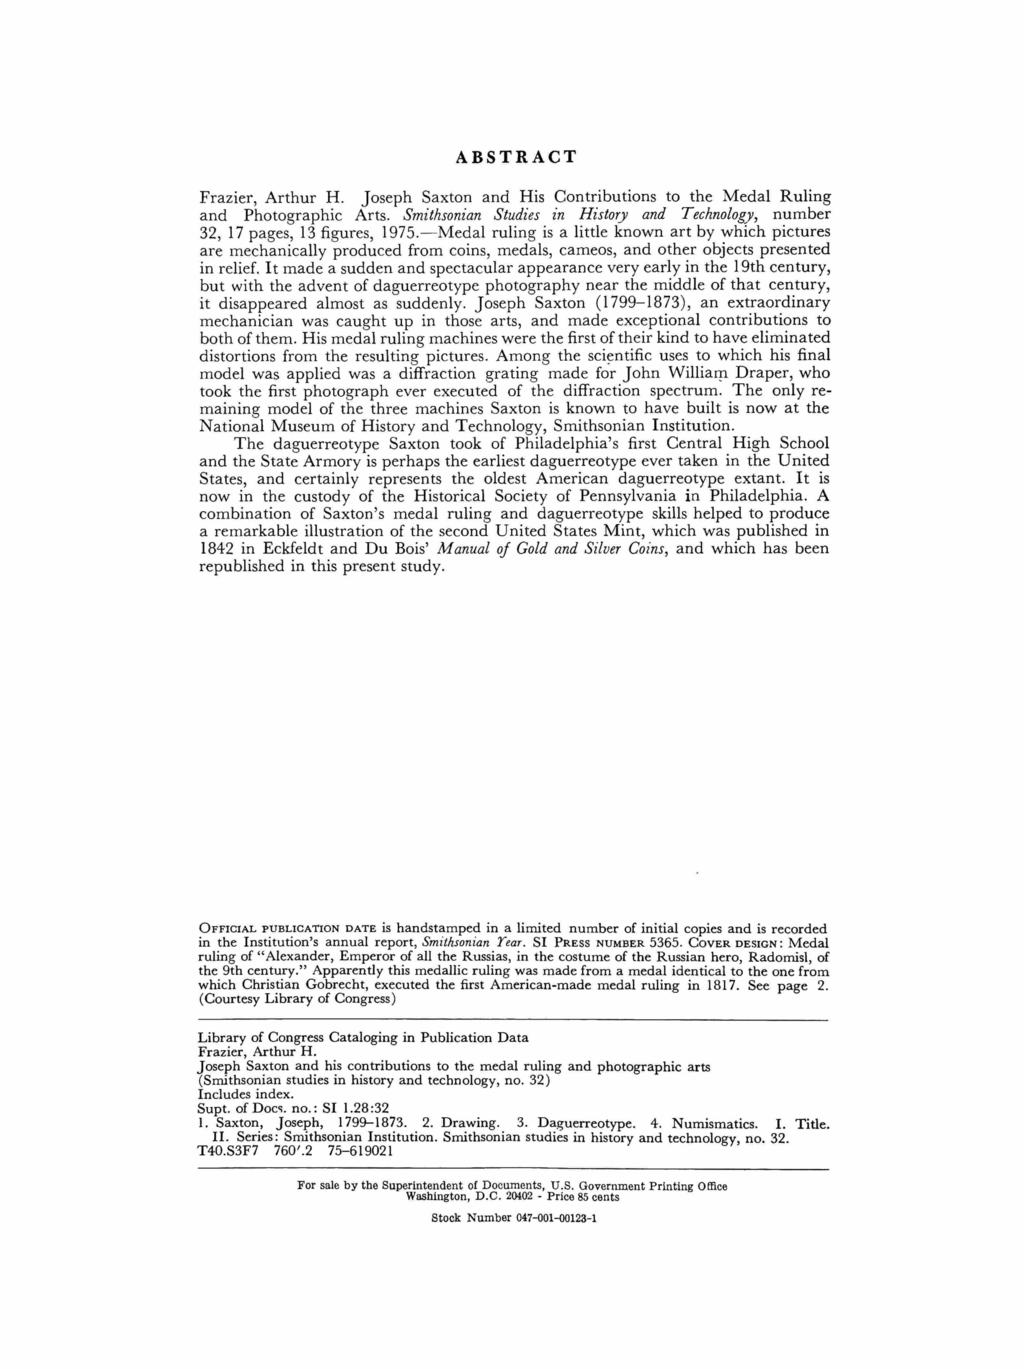 ABSTRACT Frazier, Arthur H. Joseph Saxton and His Contributions to the Medal Ruling and Photographic Arts. Smithsonian Studies in History and Technology, number 32, 17 pages, 13 figures, 1975.